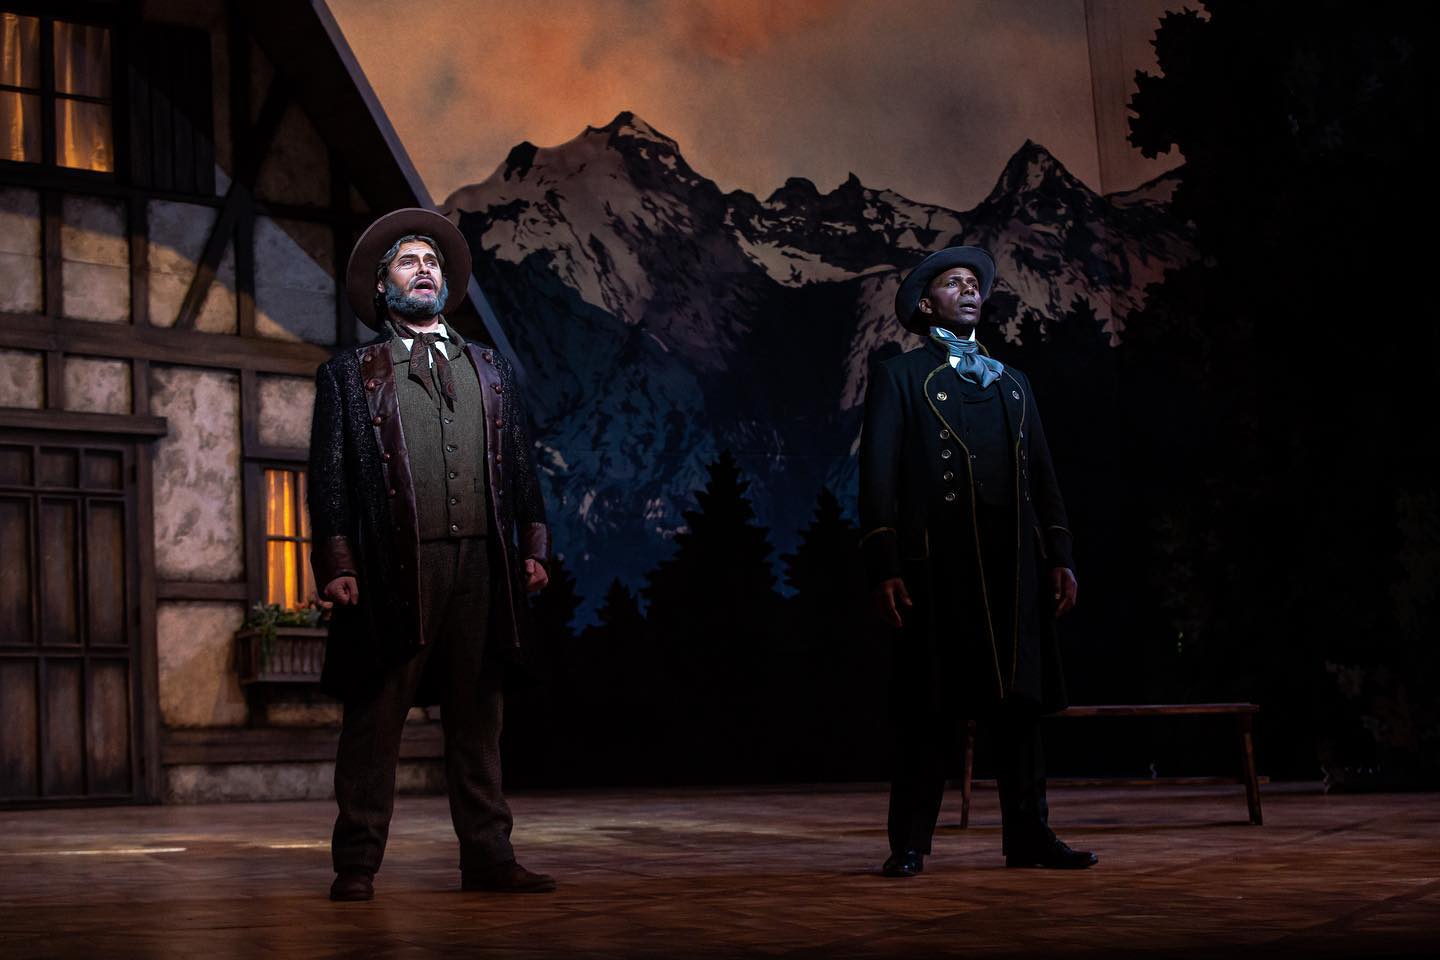 IN REVIEW: baritones SCOTT LEE as Antonio (left) and MICHAEL REDDING as Il prefetto (right) in A.J. Fletcher Opera Institute's February 2022 production of Gaetano Donizetti's LINDA DI CHAMOUNIX [Photograph © by André Peele; used with permission]